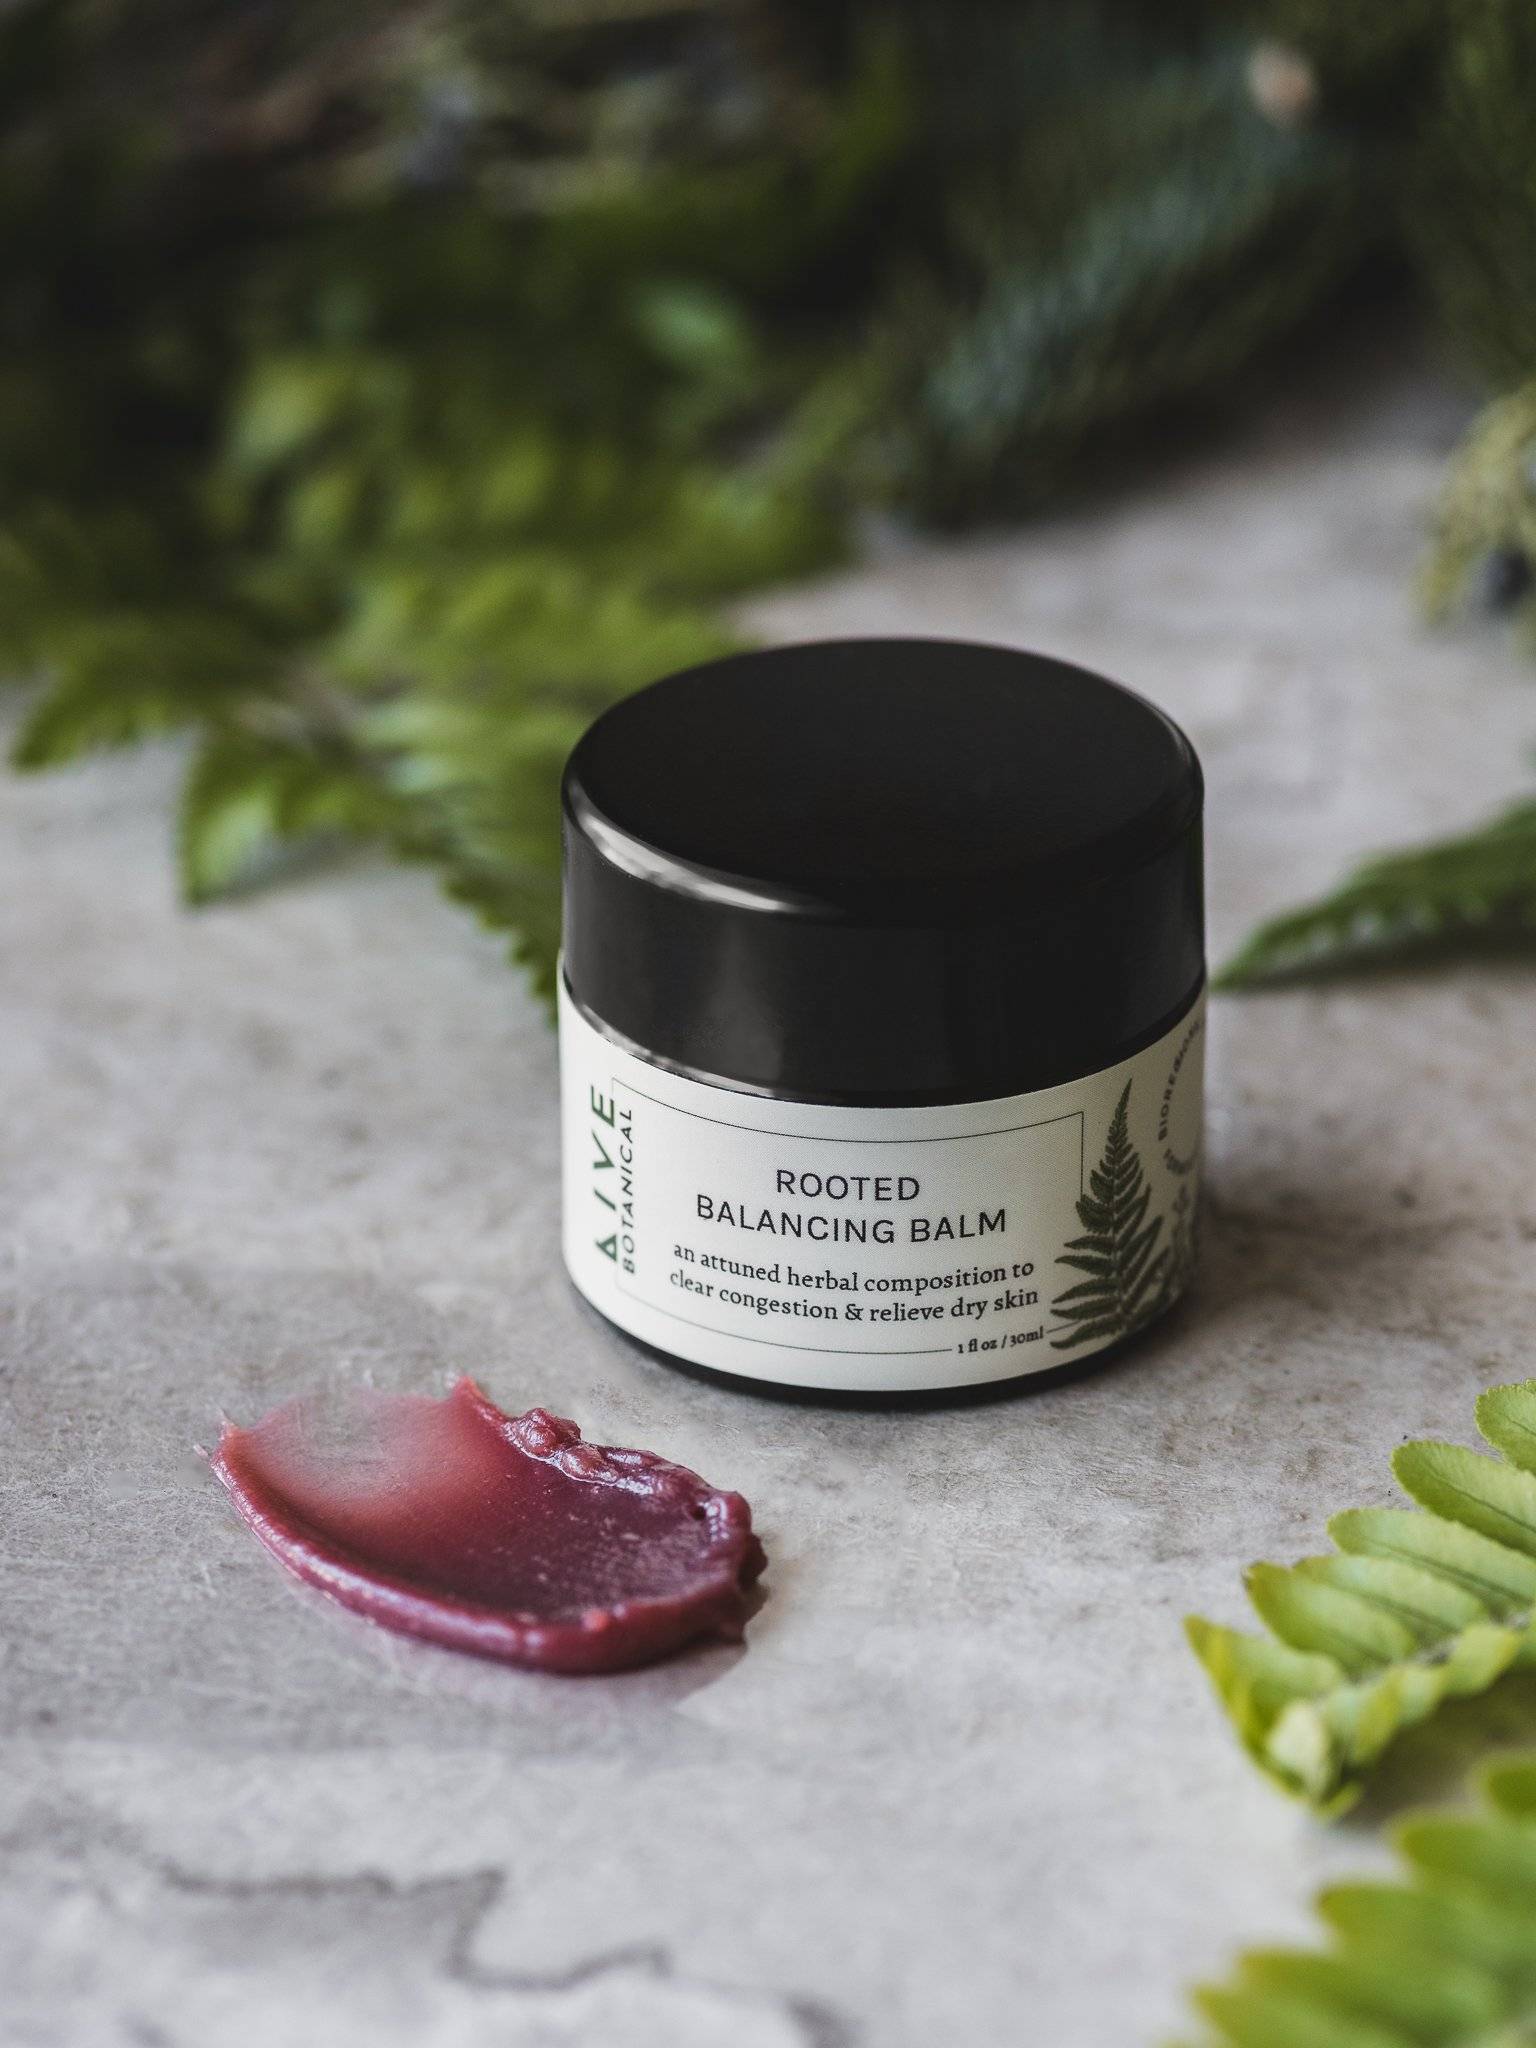 Skin Repair Balm with jar lid opened revealing a golden, soft textured balm